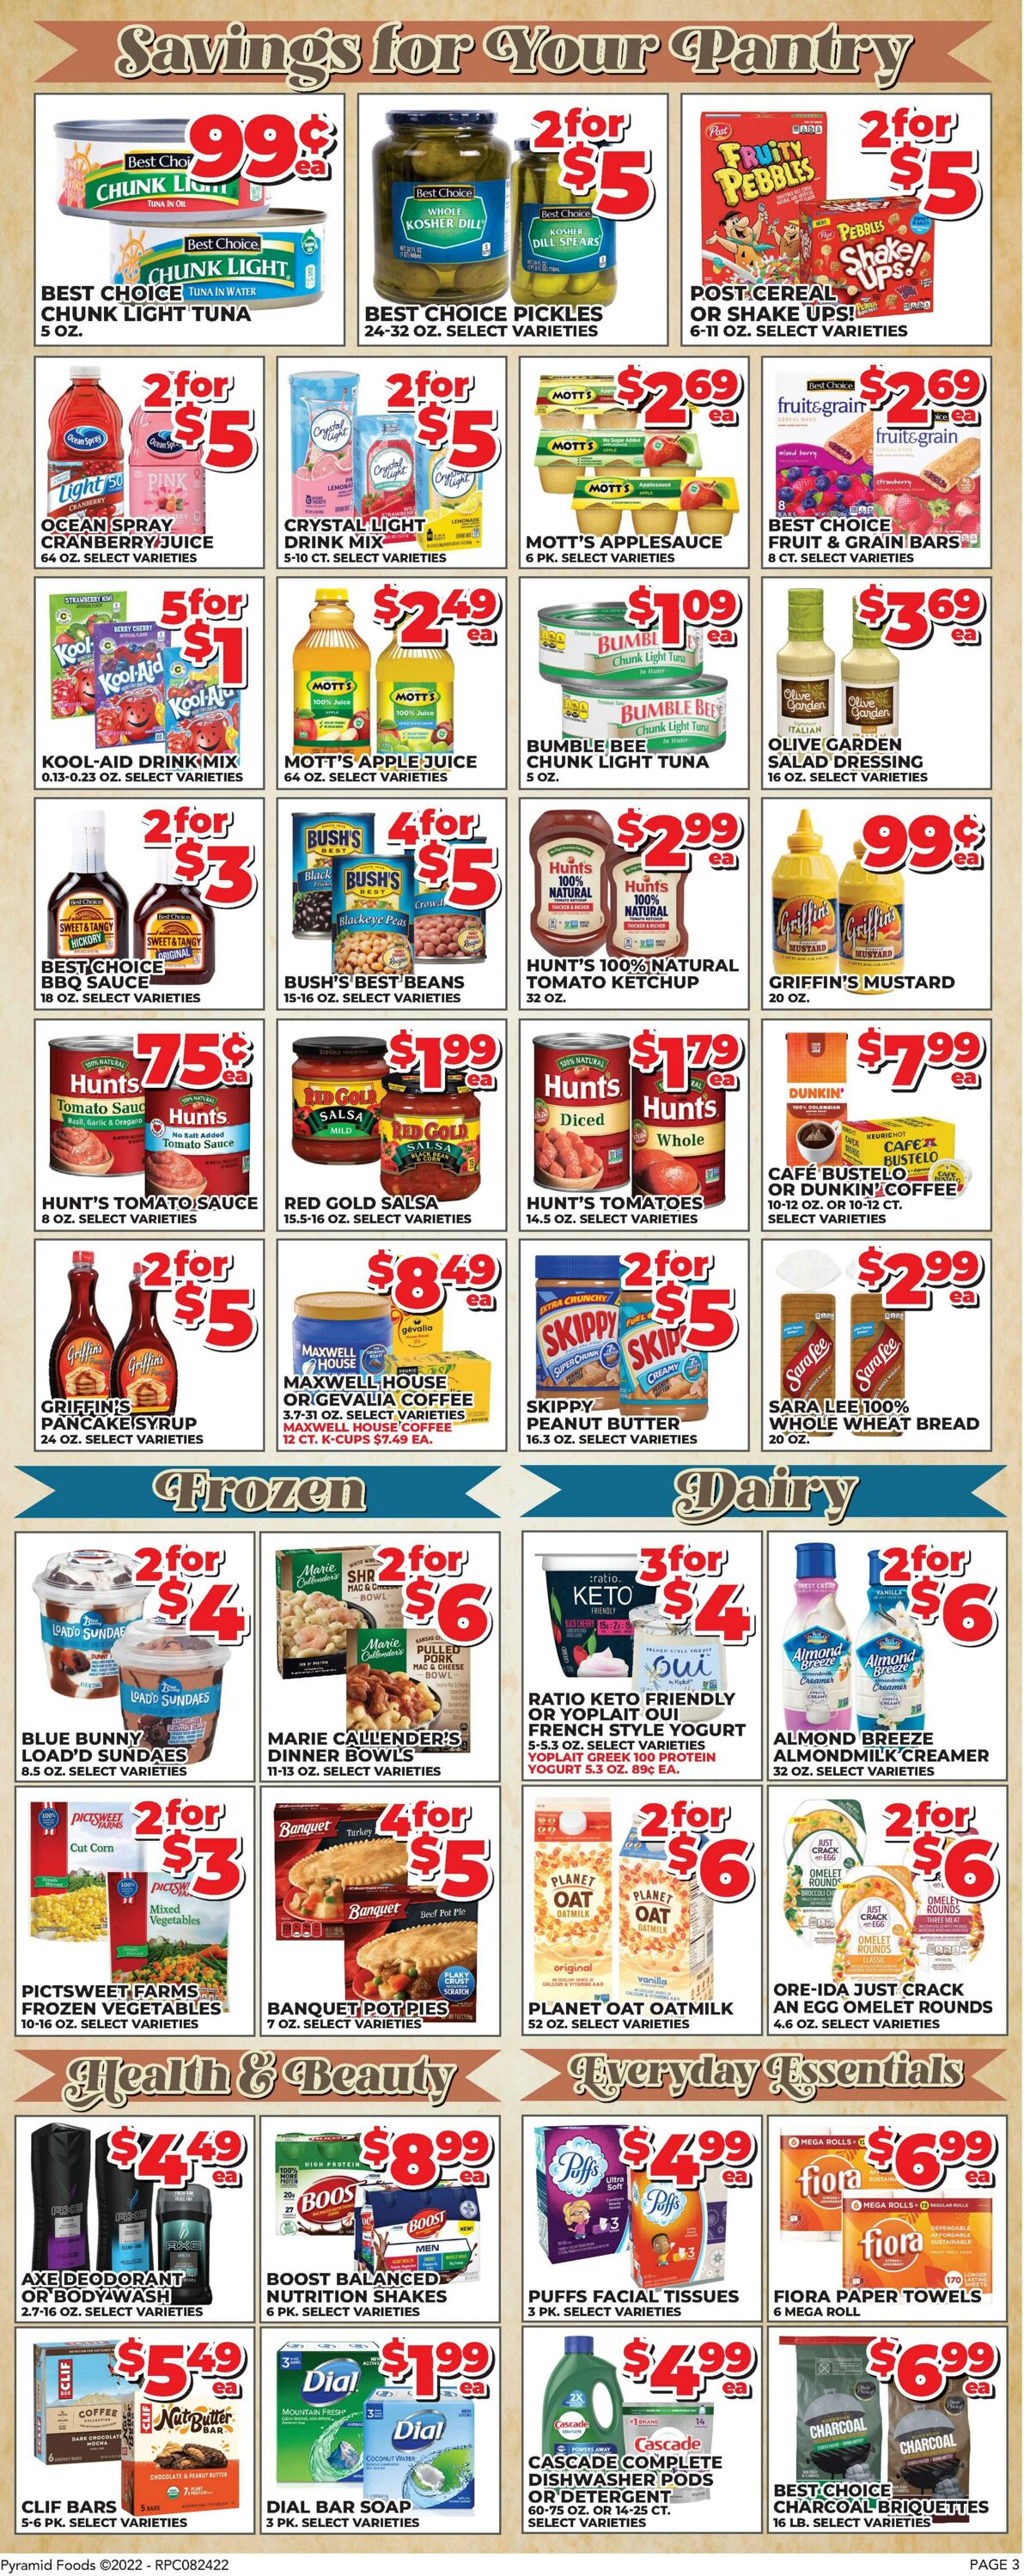 Weekly ad Price Cutter 08/24/2022 - 08/30/2022